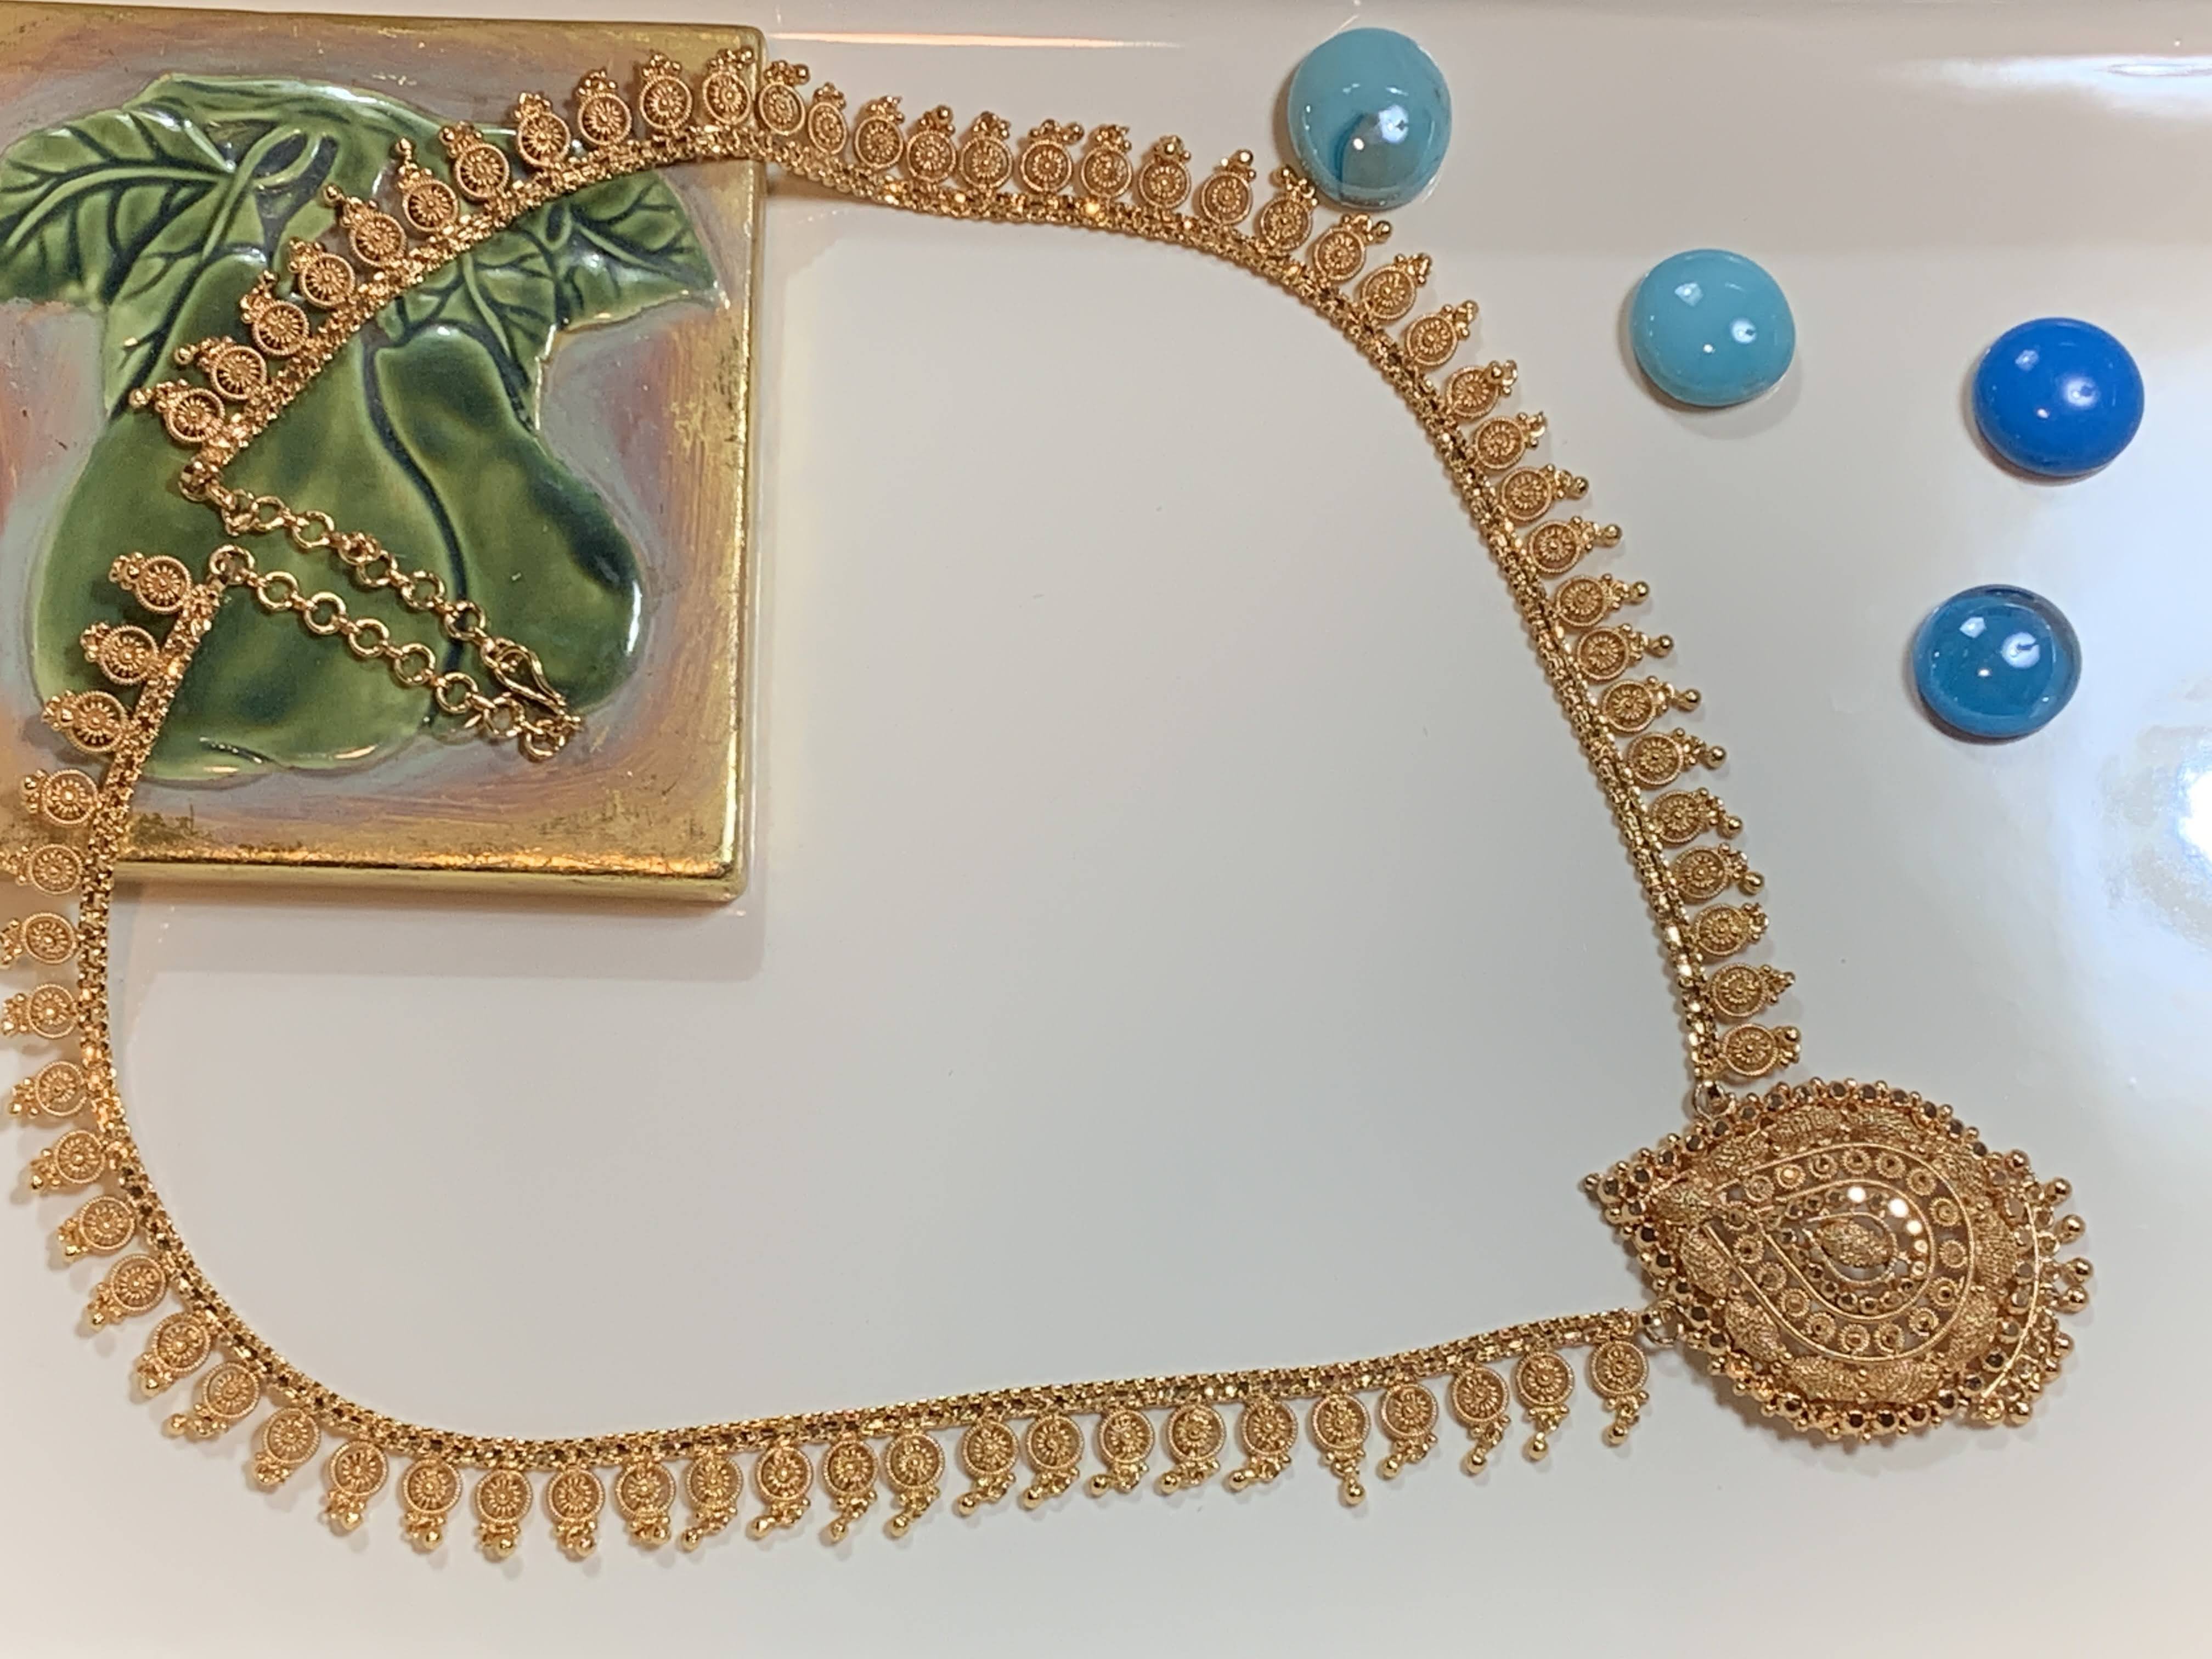 Gold Plated - Temple Jewelry - Long Necklace with Pendant - 1 gram gold plated